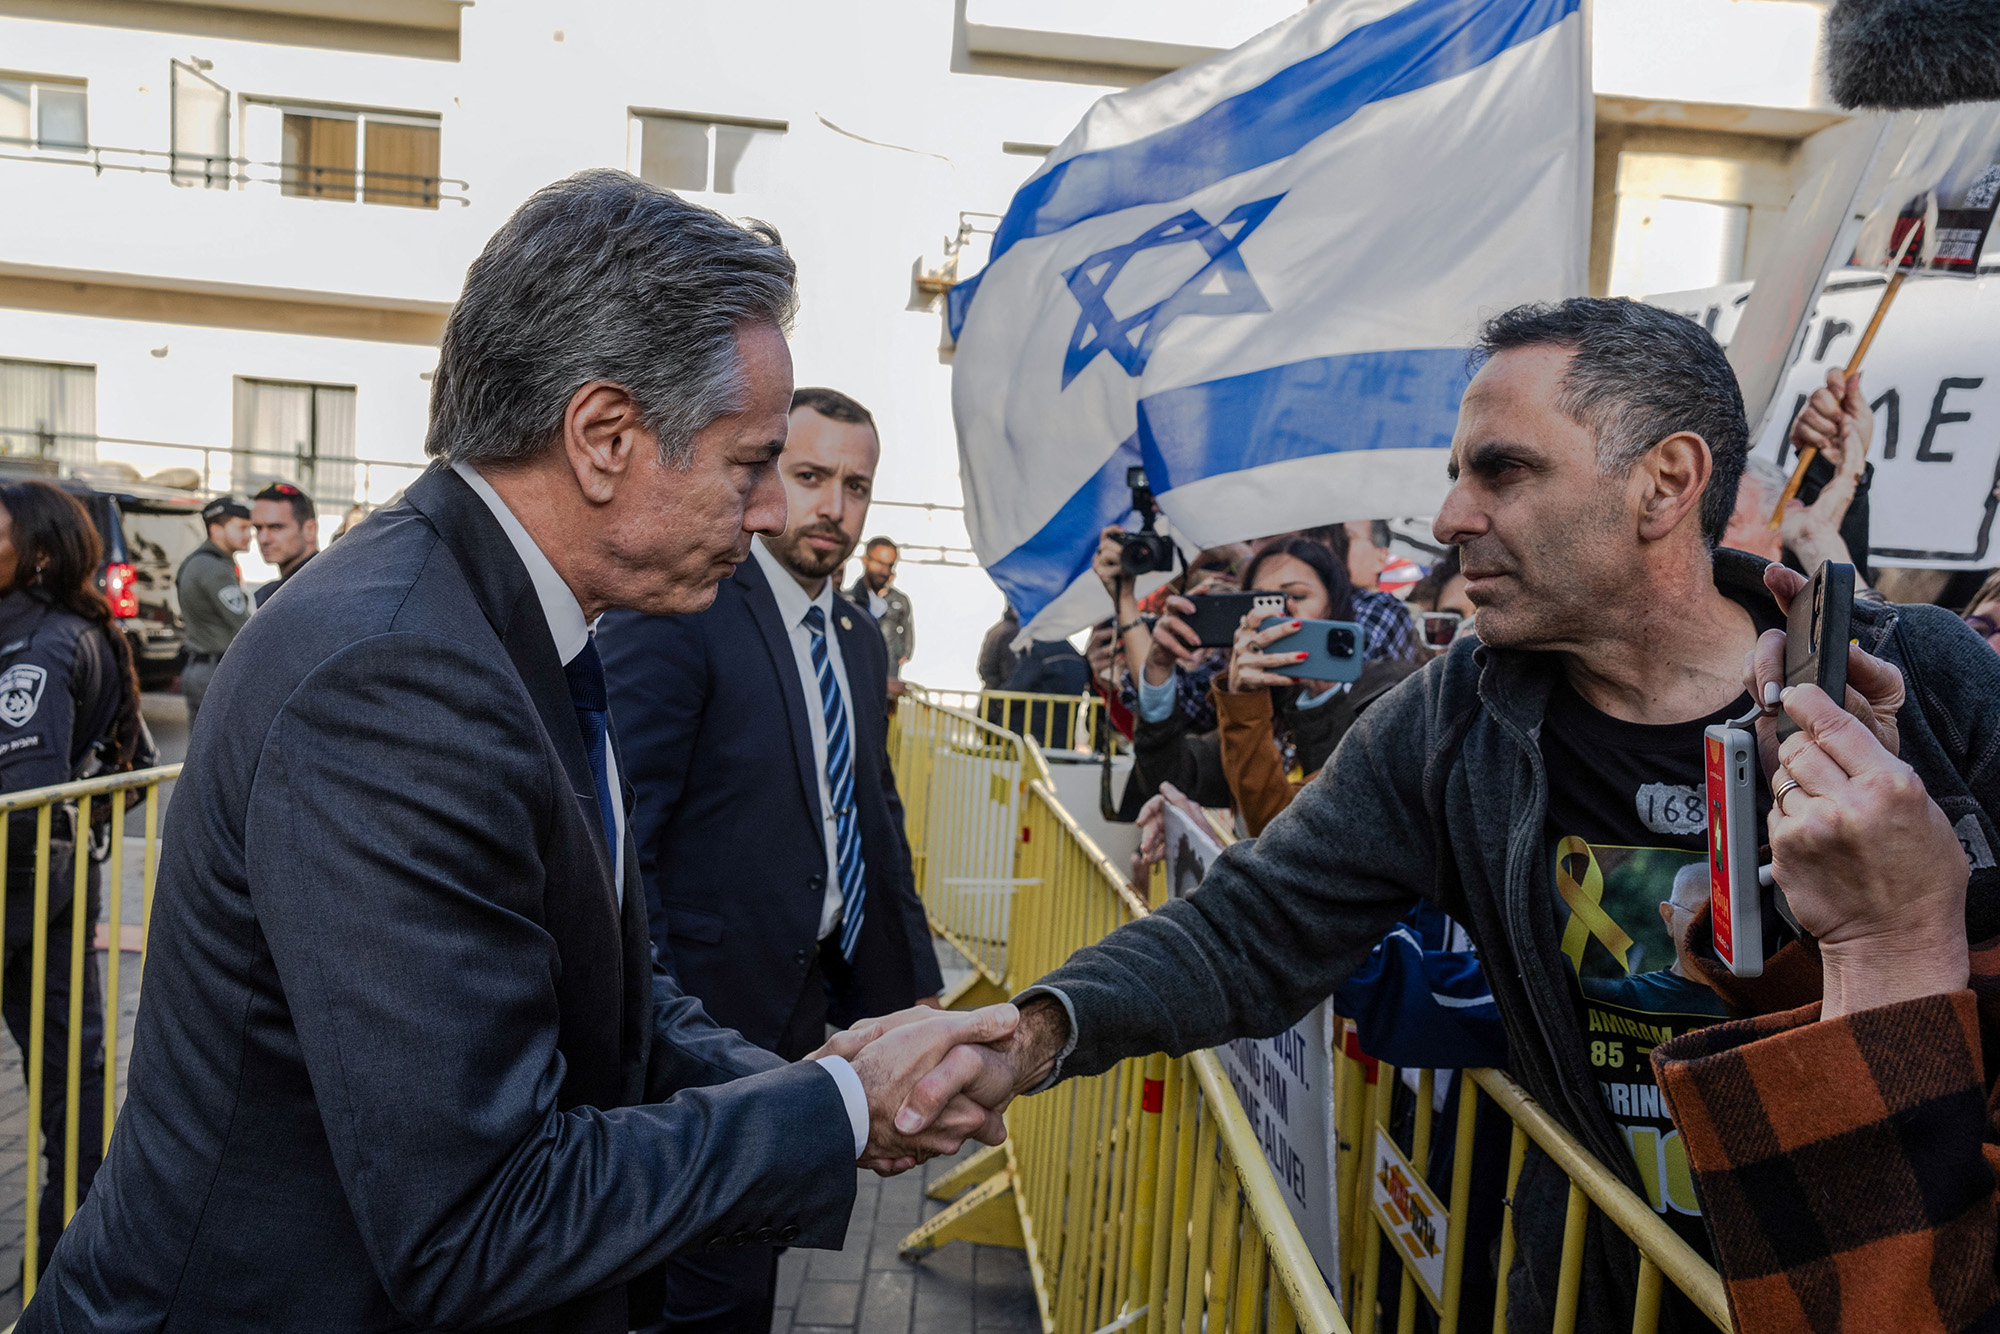 U.S. Secretary of State Antony Blinken shakes hands with a man as he meets demonstrators calling for the release of hostages kidnapped in the October 7 attack, outside the Kempinski hotel in Tel Aviv, Israel, on March 22.